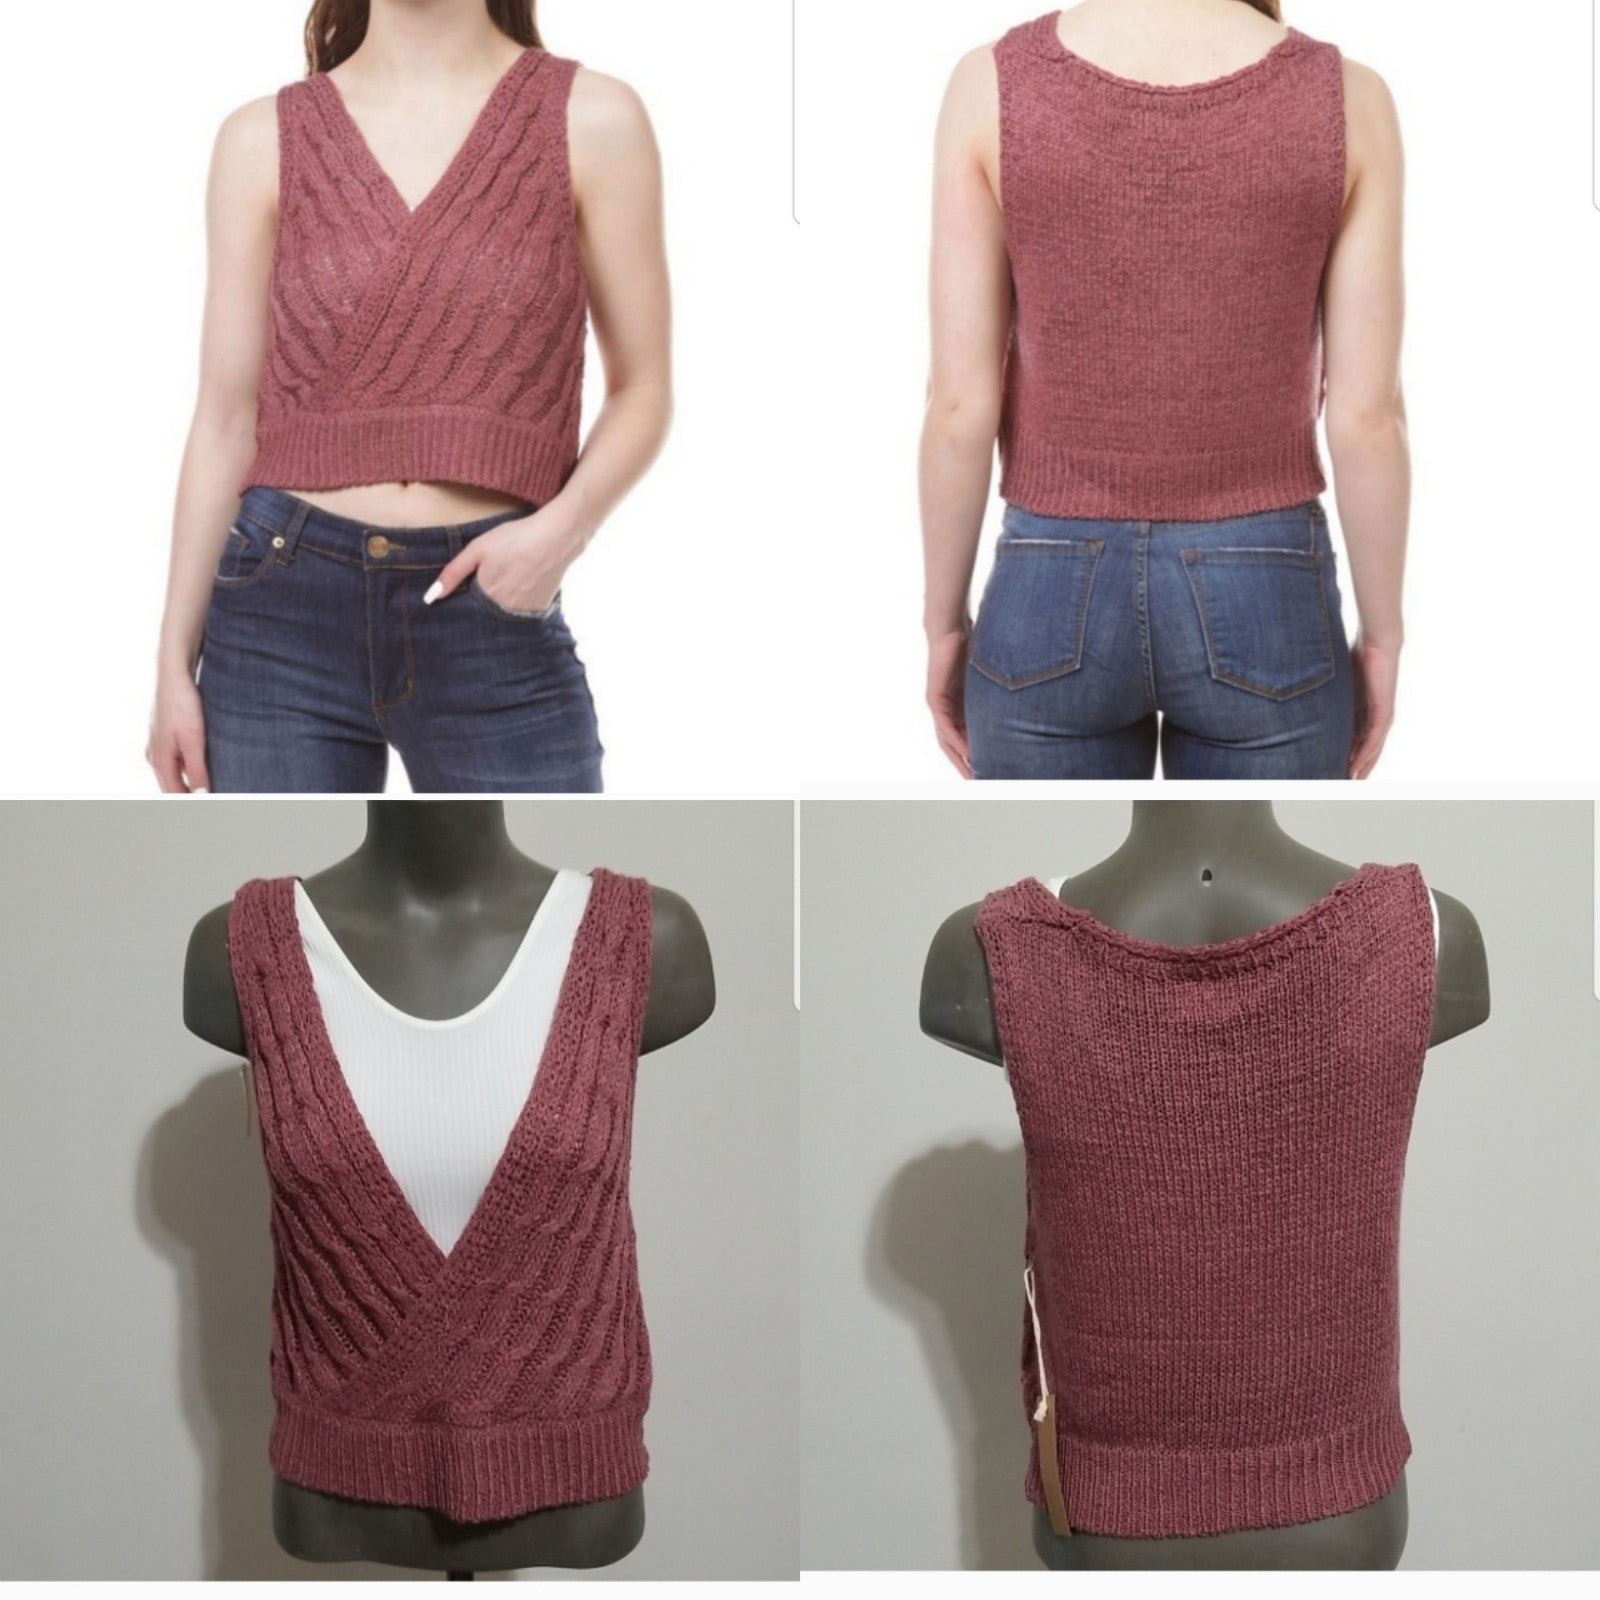 the Lowest price Sweater Tank in rose sz large G91CcuzWA Hot Sale